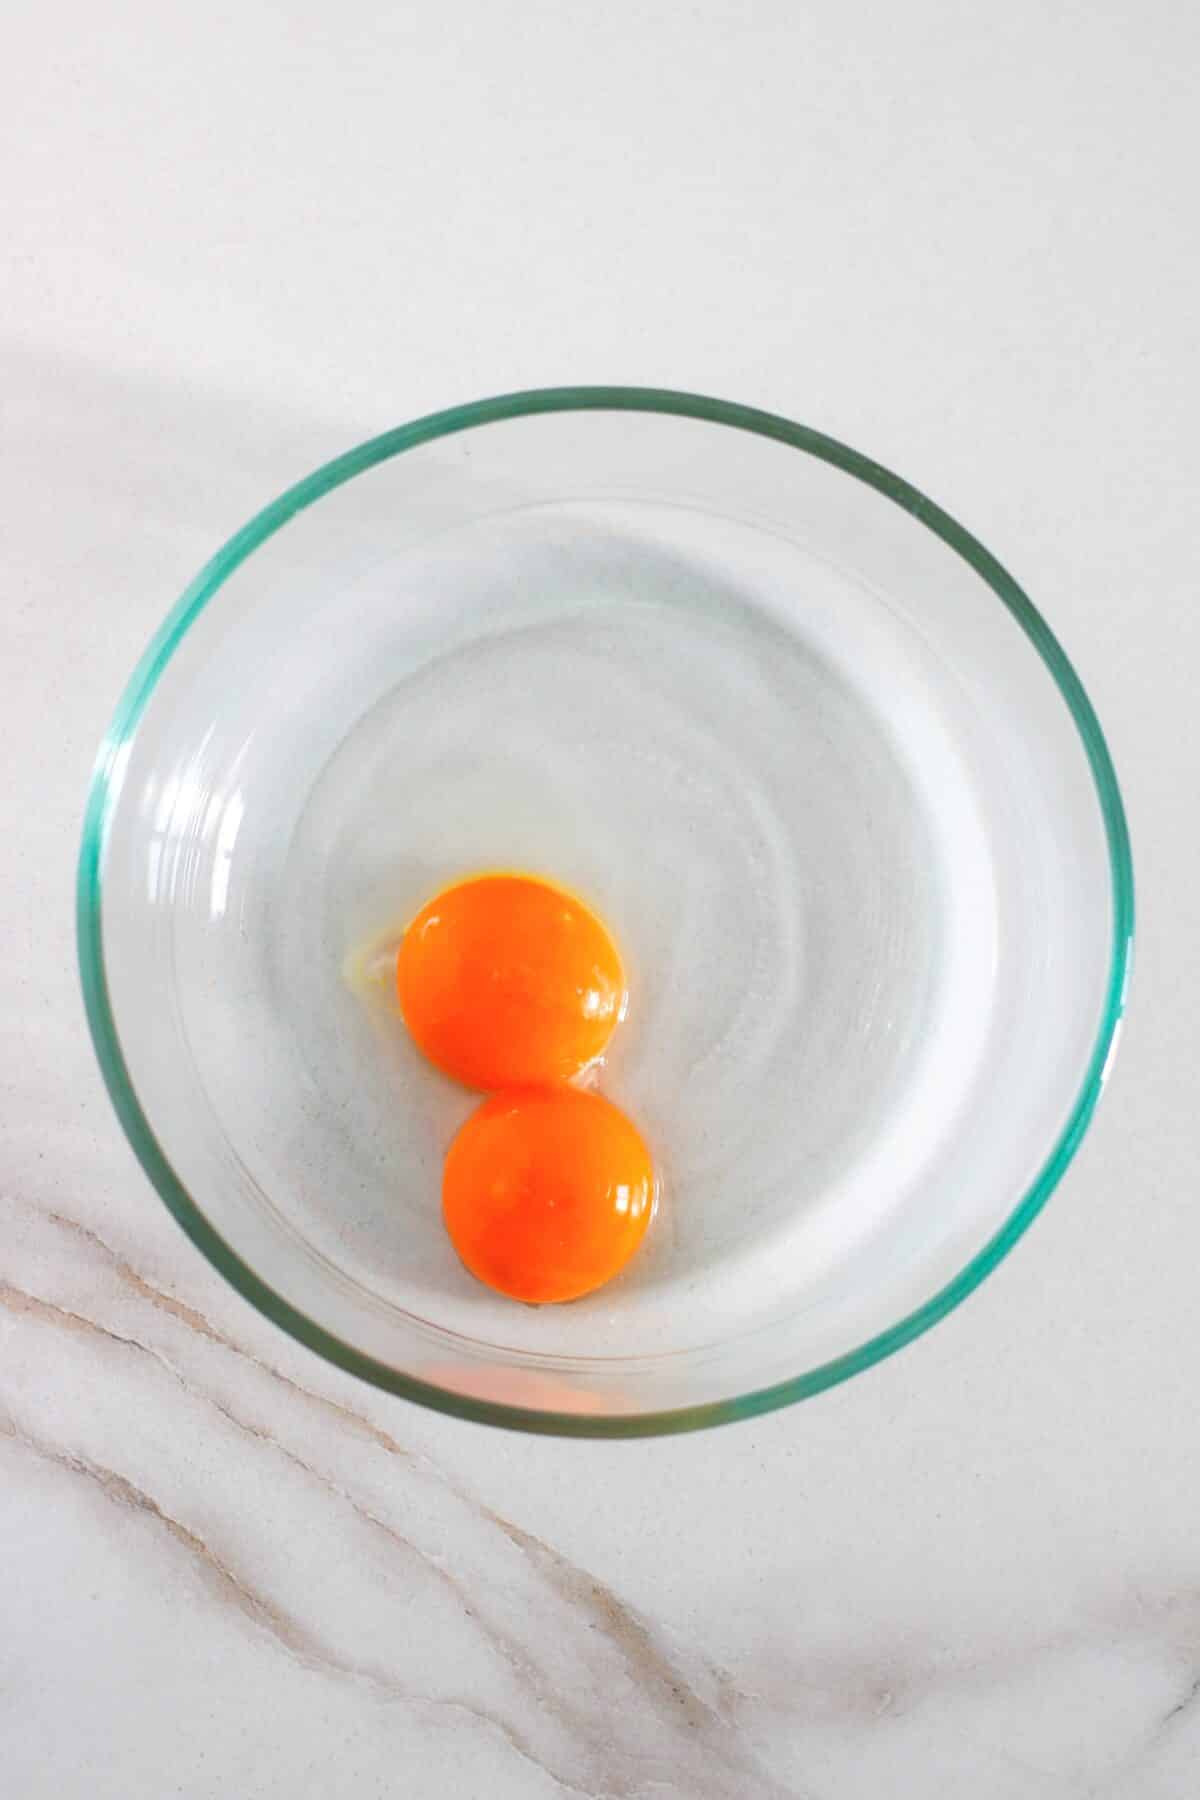 Eggs in a clear glass bowl.